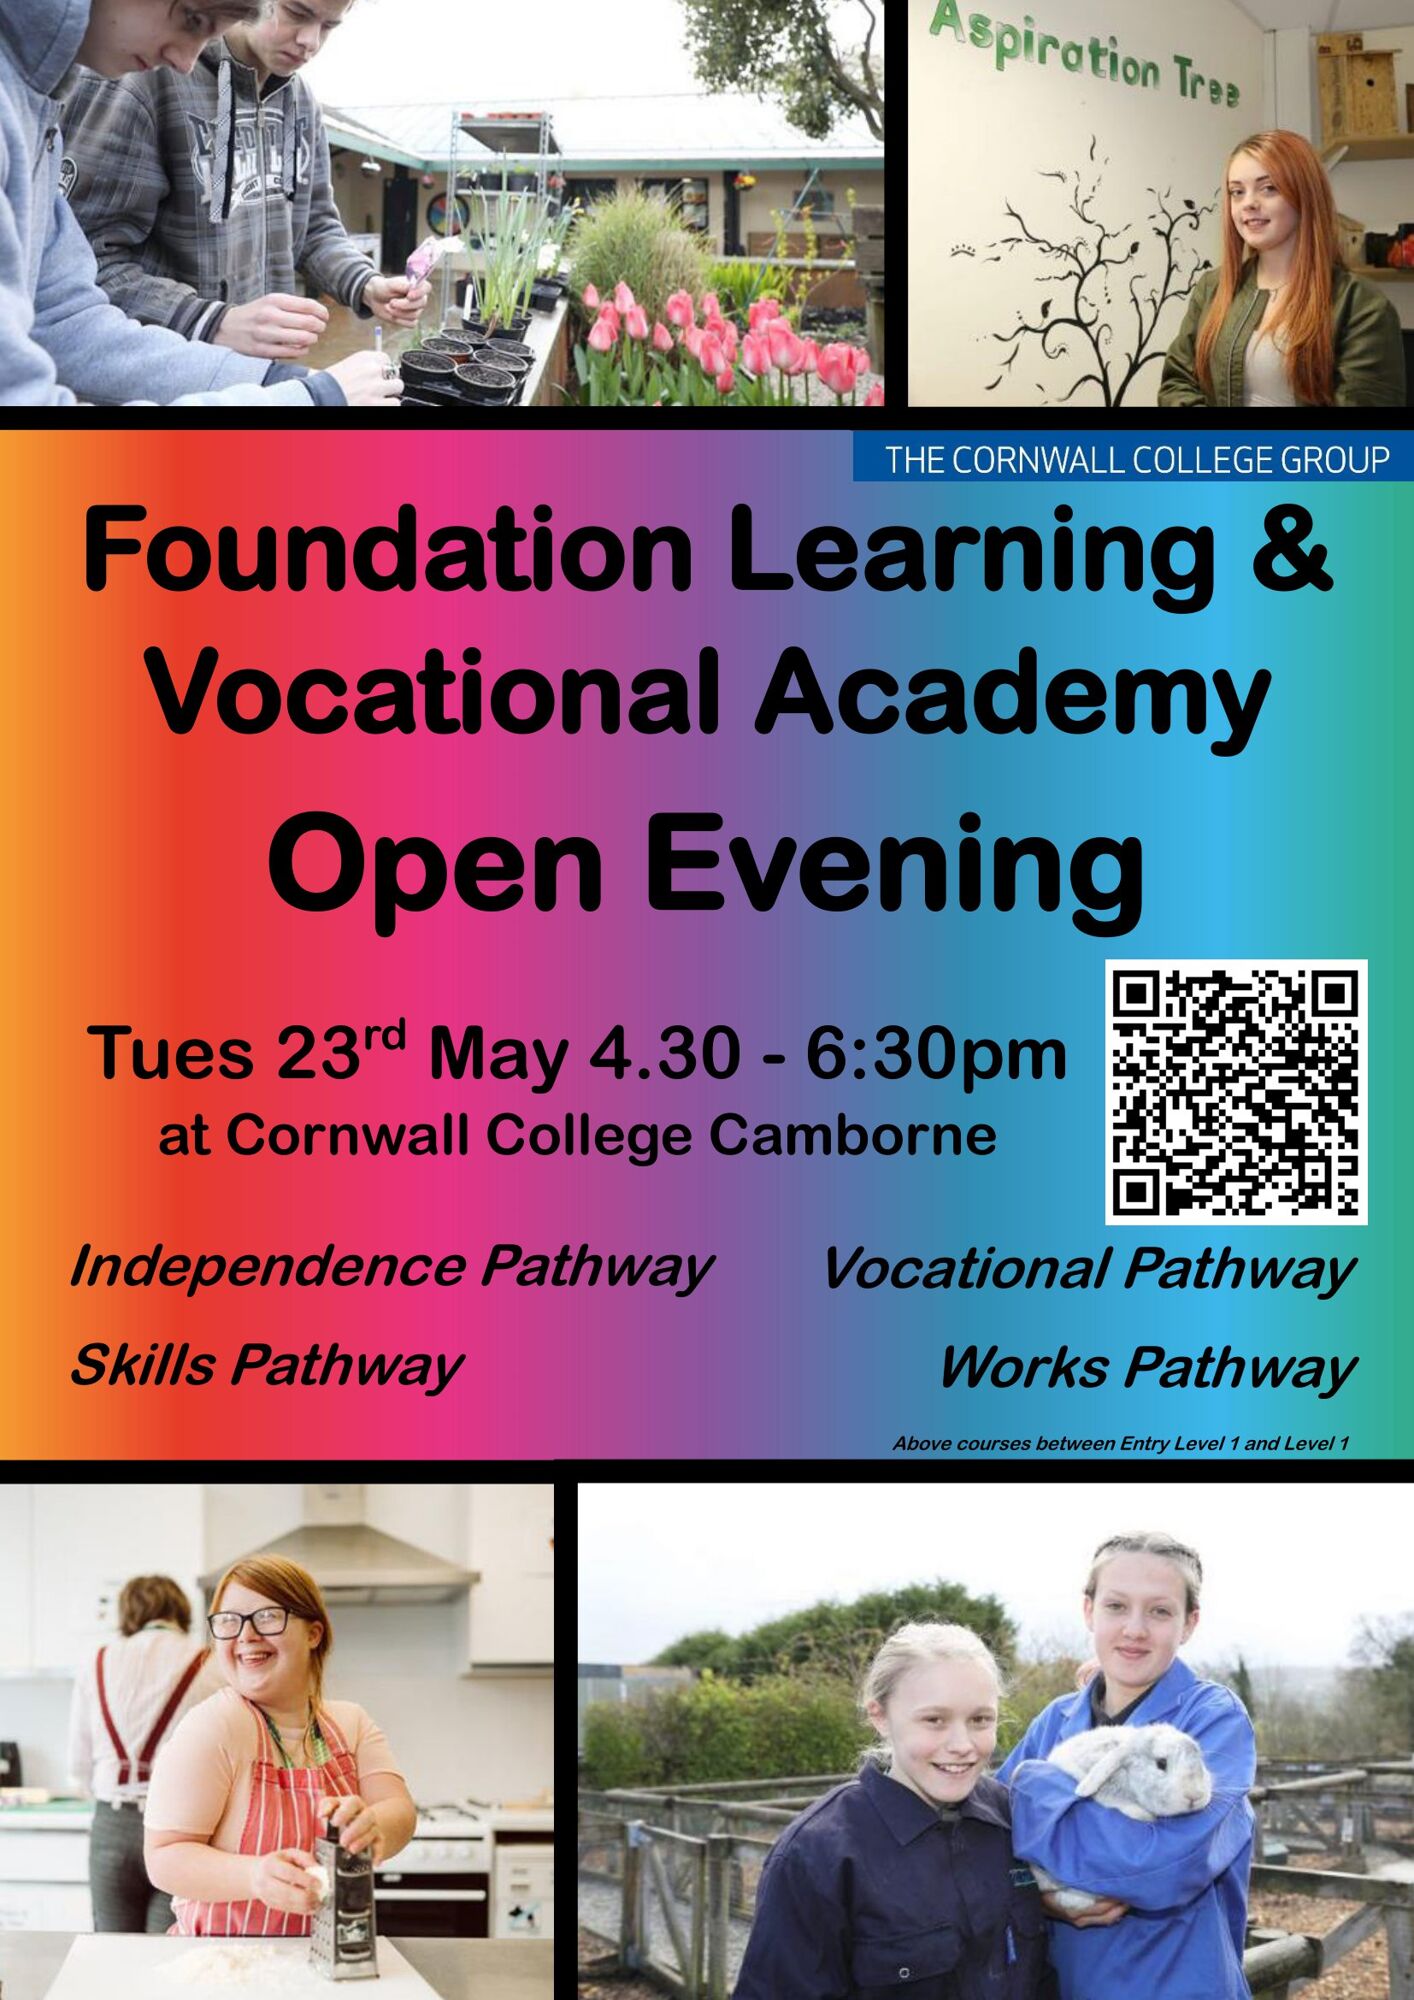 Foundation Learning & Vocational Academy Open Evening